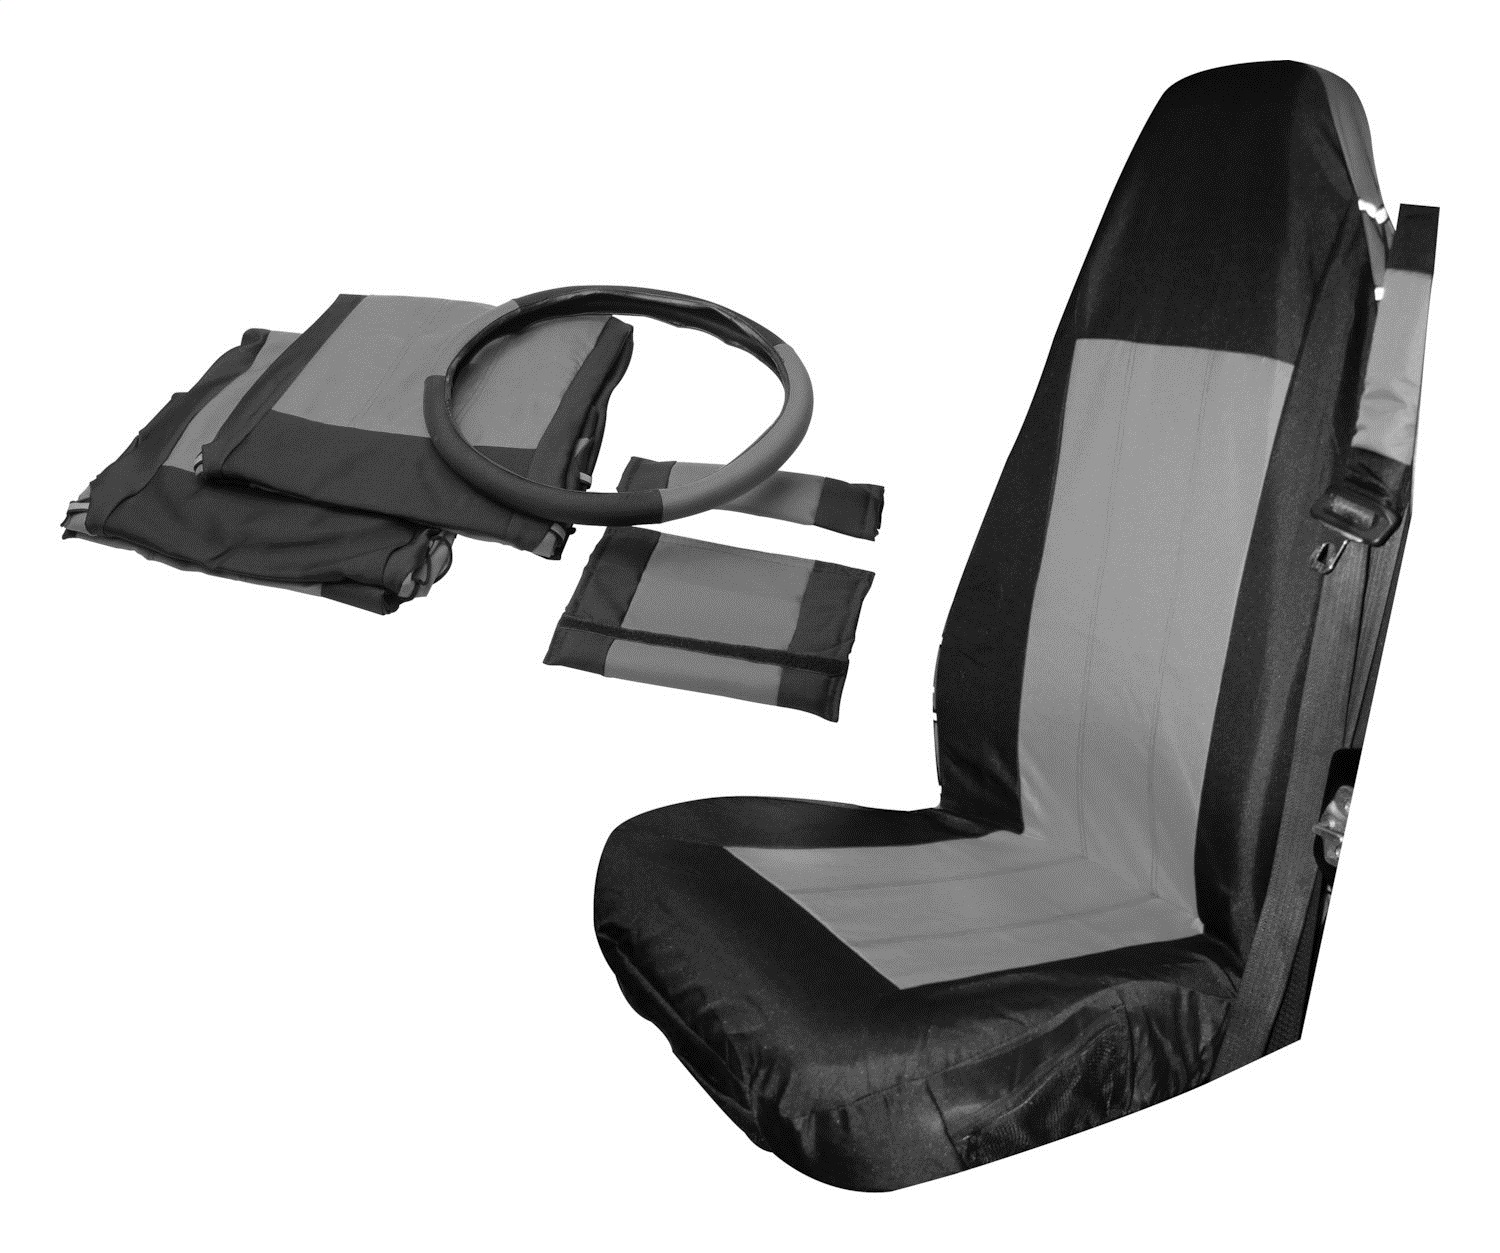 RT Off-Road SCP20021 Fabric Black Seat Cover Set